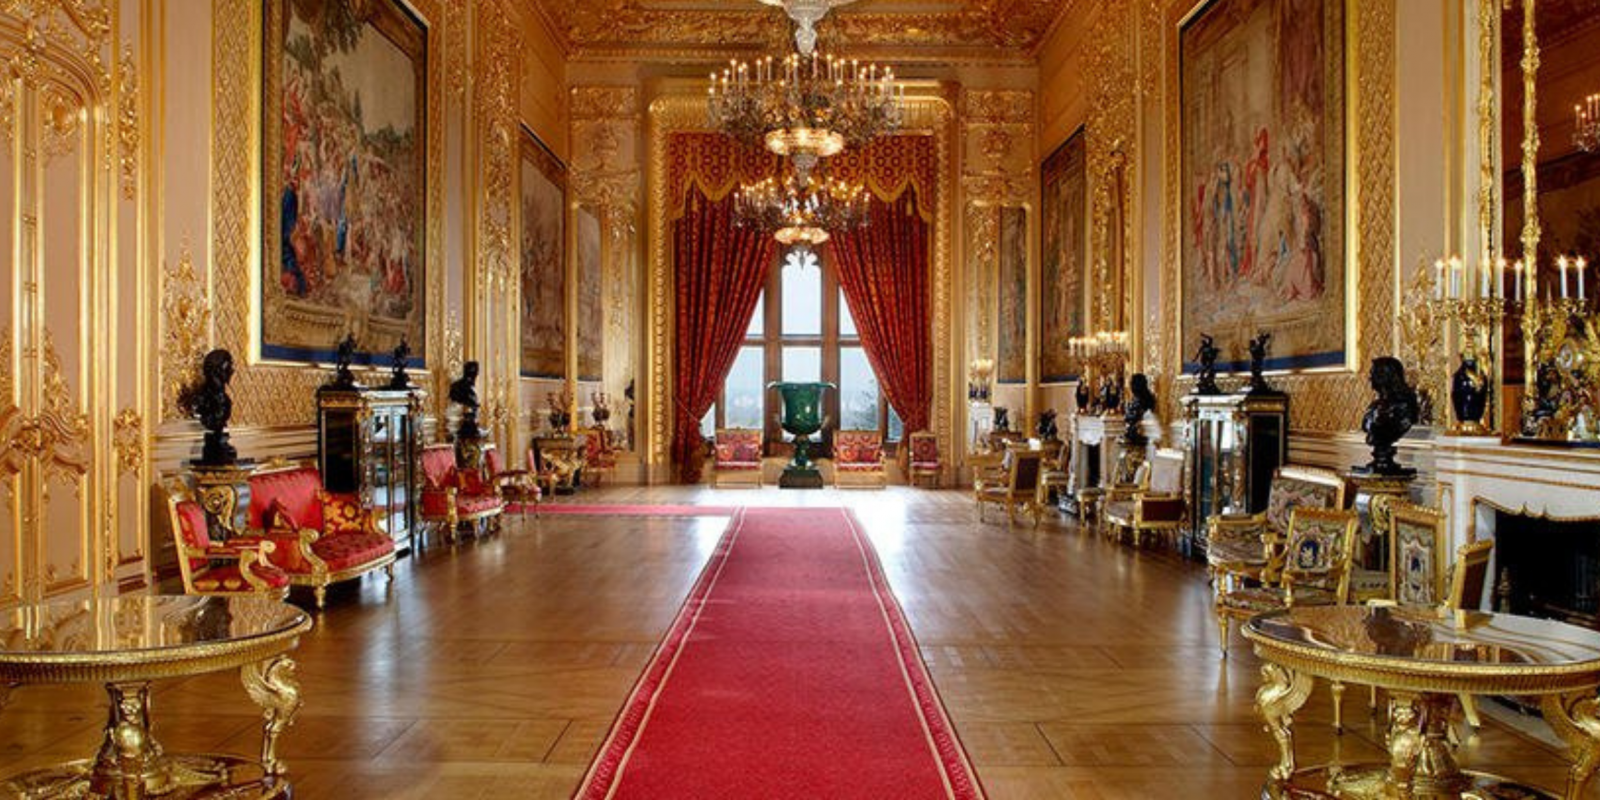 Blog Graphic for Royal Floors: Flooring in Castles and Palaces - Garrison Collection - Windsor Castle